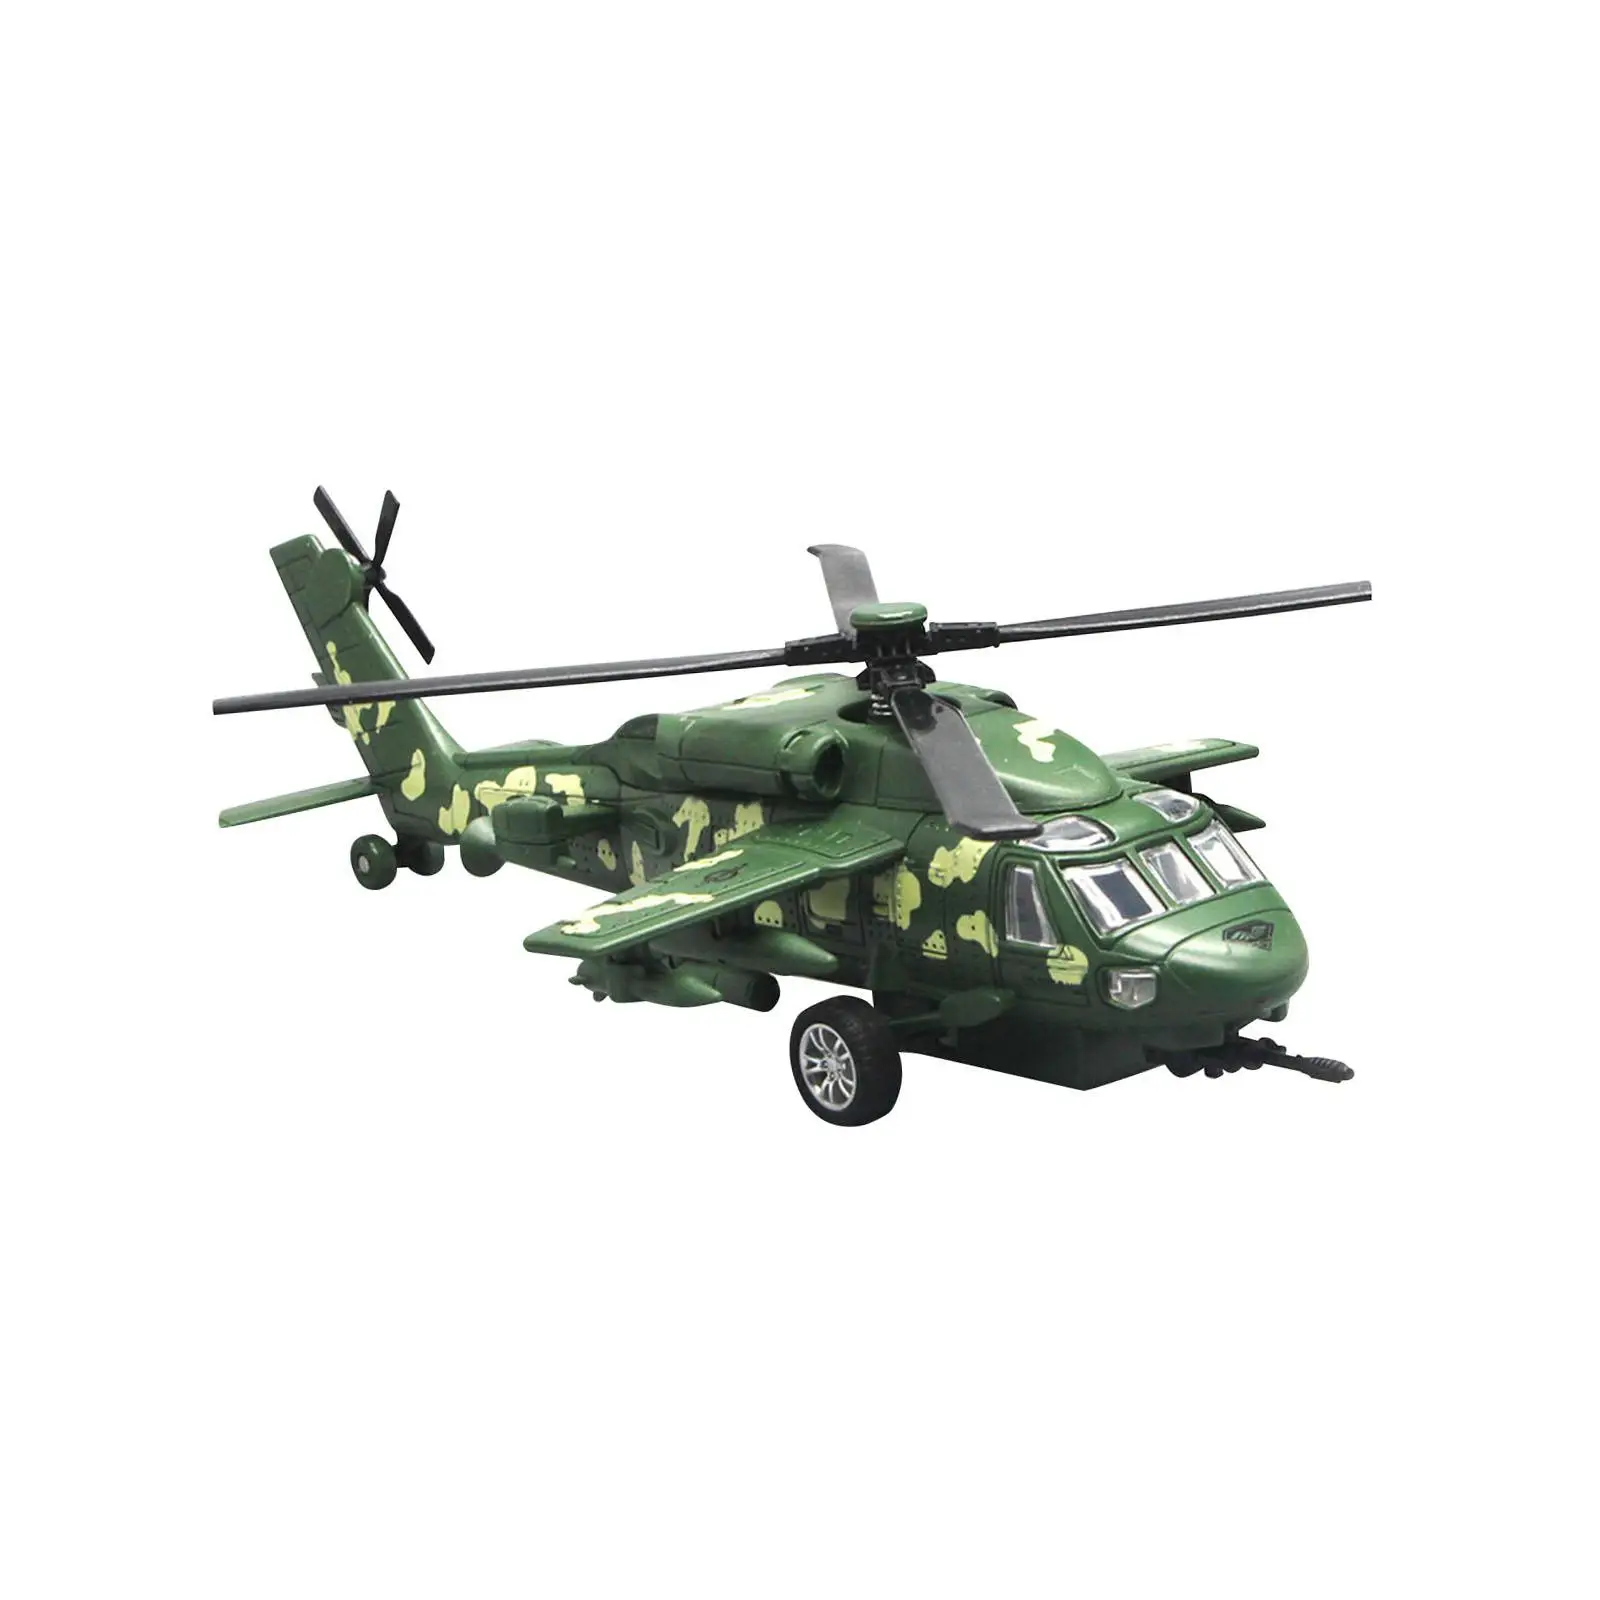 Diecast Helicopter Pull Back Aircraft Crafts Simulation Aviation Plane Model Souvenirs Kids Toys Holiday Gifts Shelf Commemorate